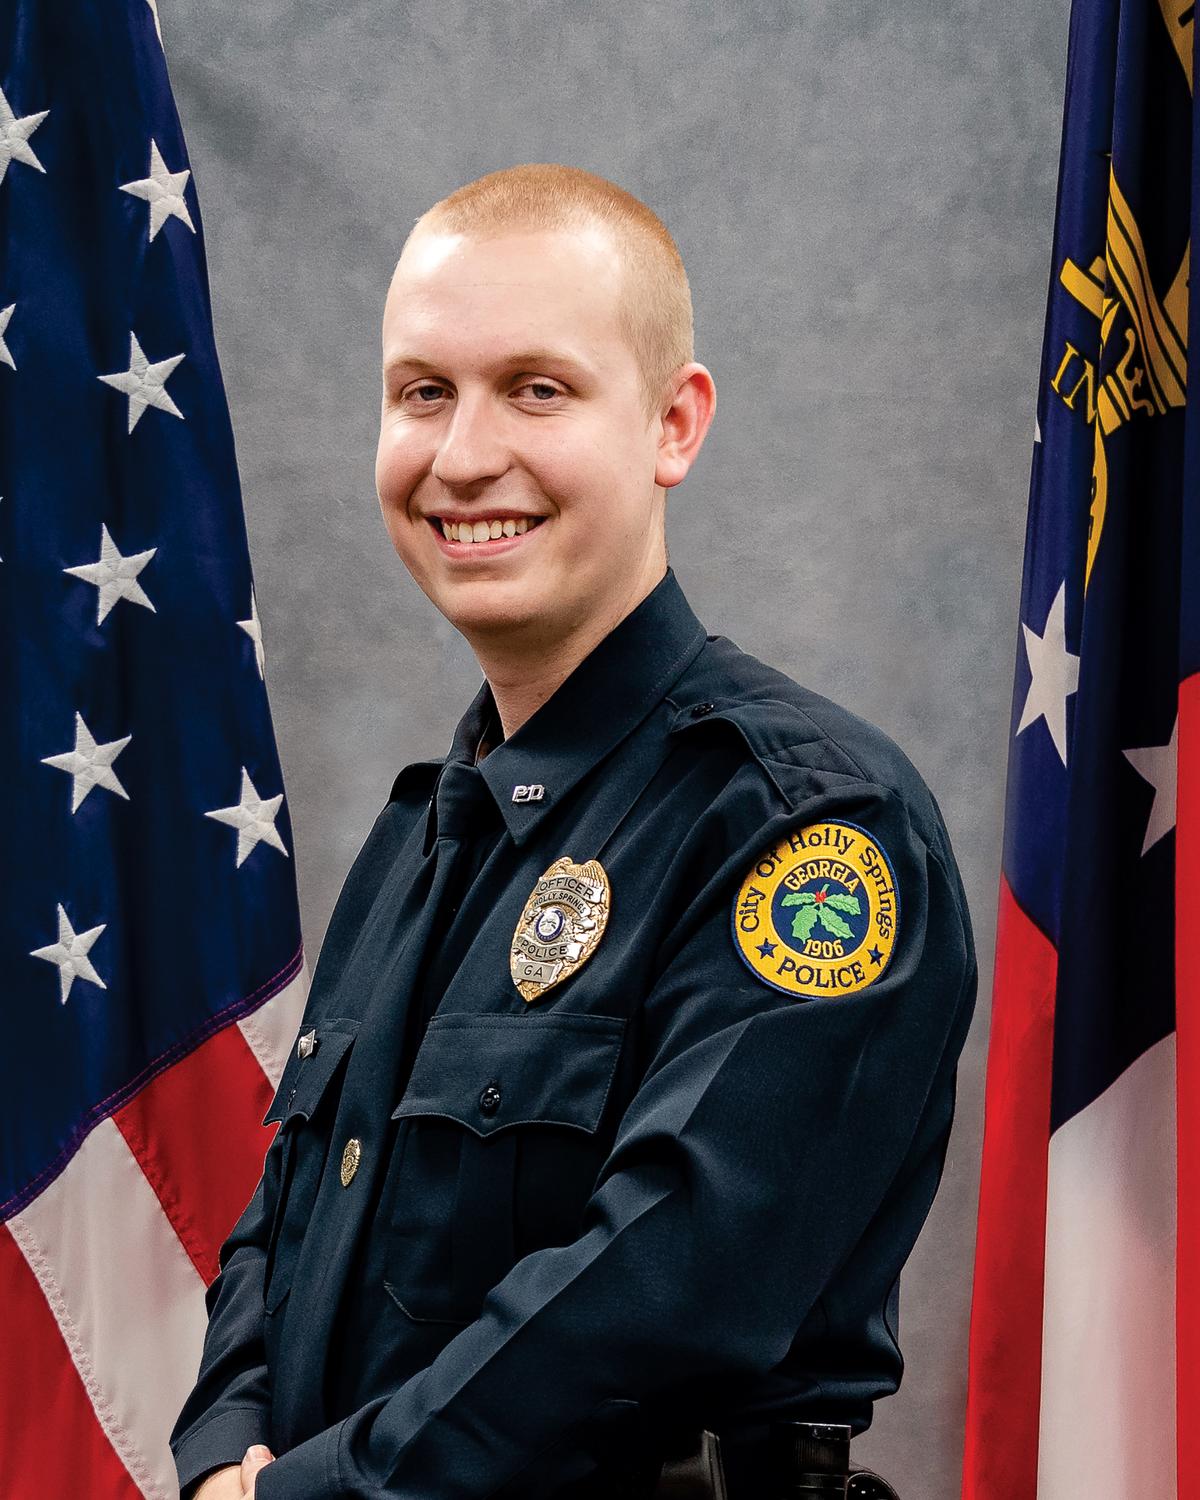 Officer Joe Burson, who was killed in the line of duty in June 2021. (Courtesy of Holly Springs Police Department)